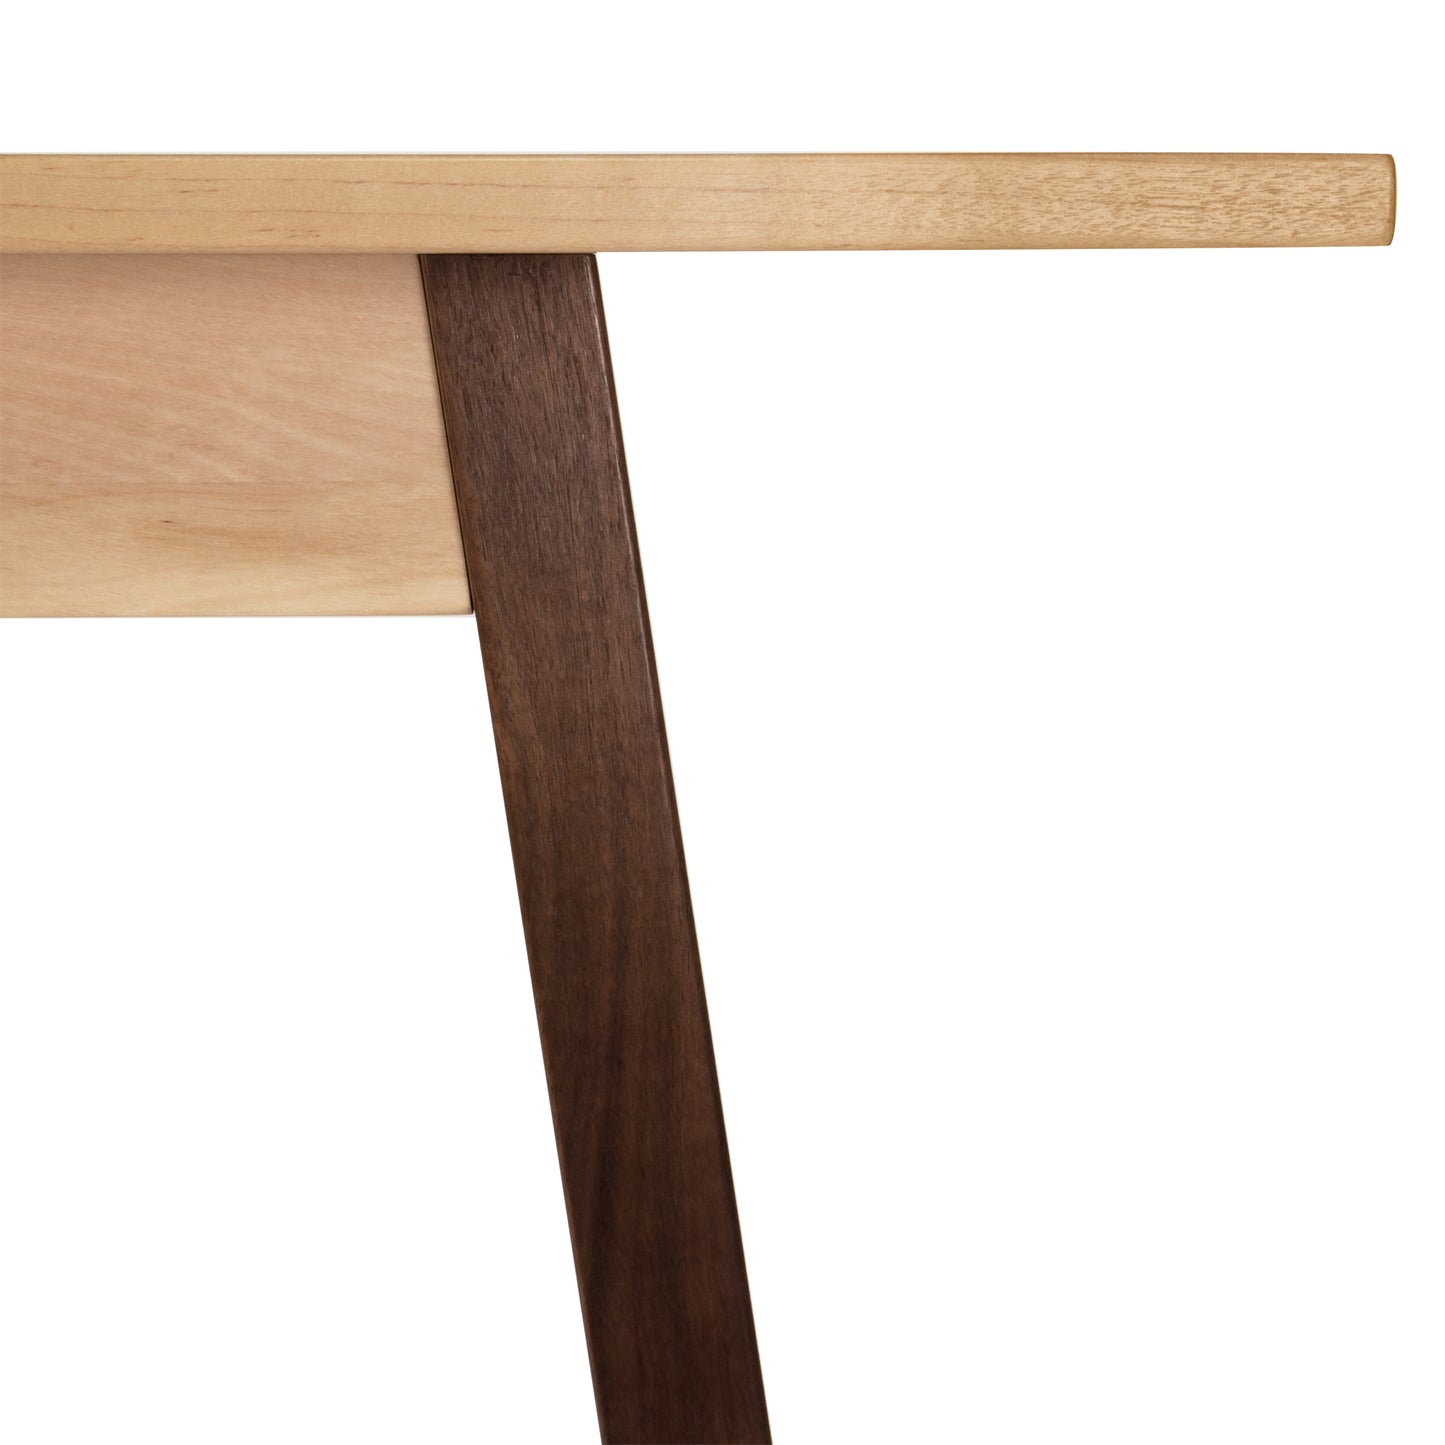 A table with a wooden top and wooden legs.